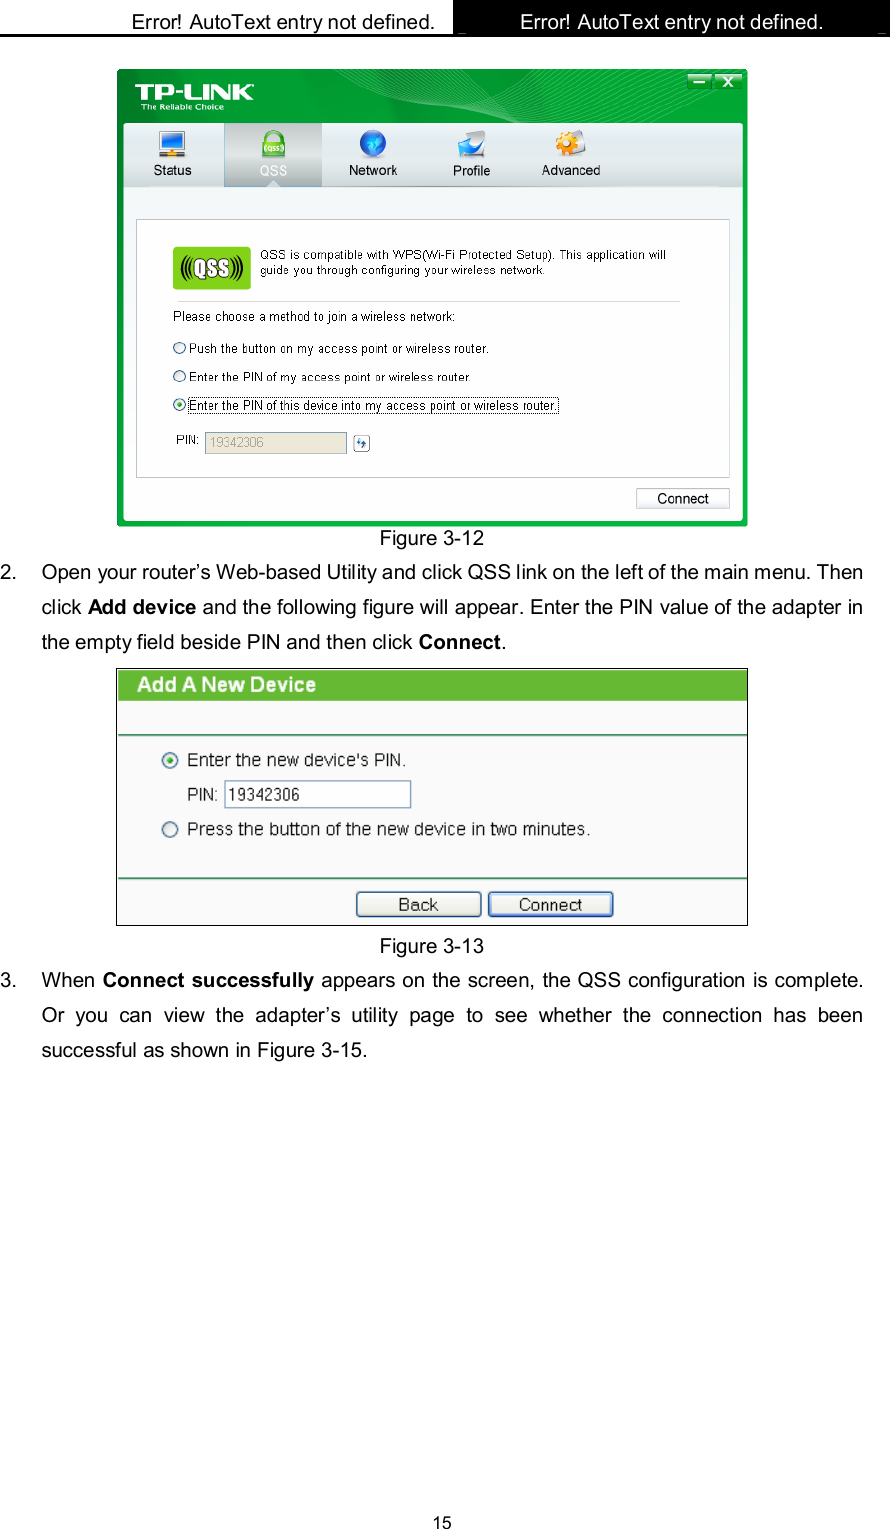    Error! AutoText entry not defined. Error! AutoText entry not defined.    15  Figure 3-12 2.  Open your router’s Web-based Utility and click QSS link on the left of the main menu. Then click Add device and the following figure will appear. Enter the PIN value of the adapter in the empty field beside PIN and then click Connect.  Figure 3-13 3.  When Connect successfully appears on the screen, the QSS configuration is complete. Or  you  can  view  the  adapter’s  utility  page  to  see  whether  the  connection  has  been successful as shown in Figure 3-15.   